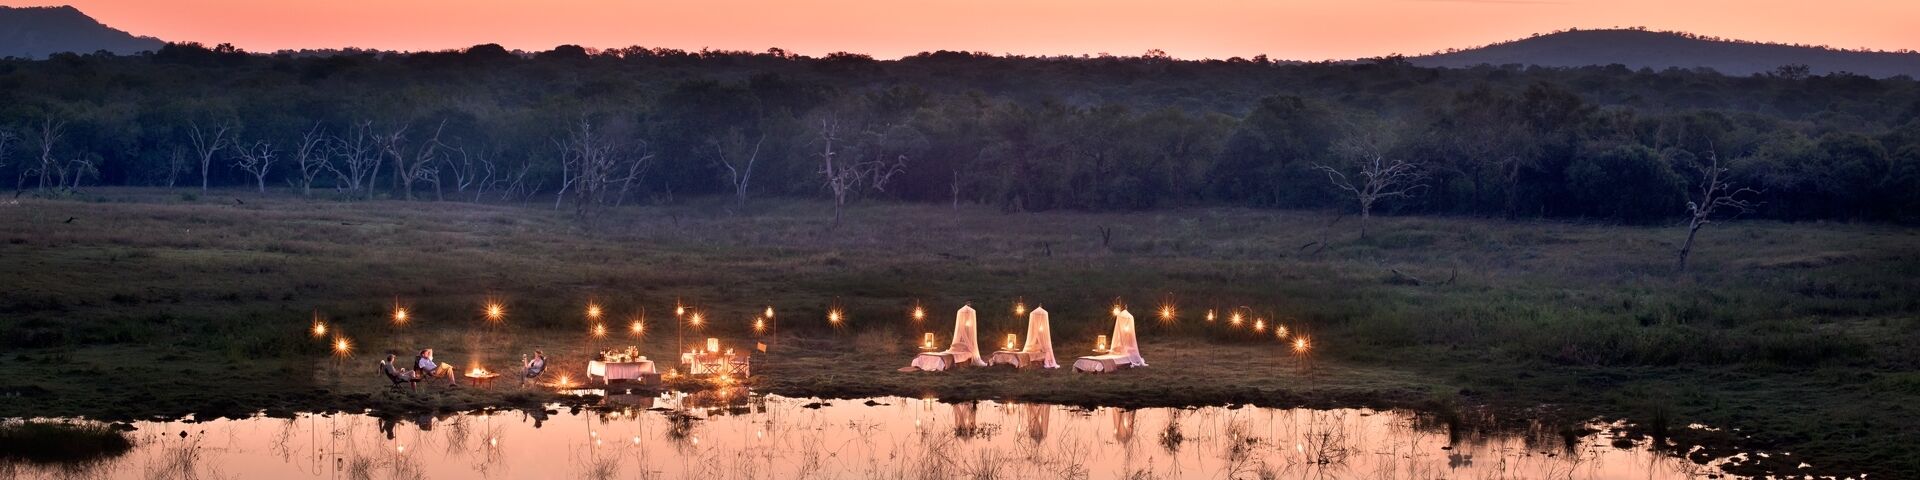 Phinda Private Game Reserve, sleep out under the stars banner